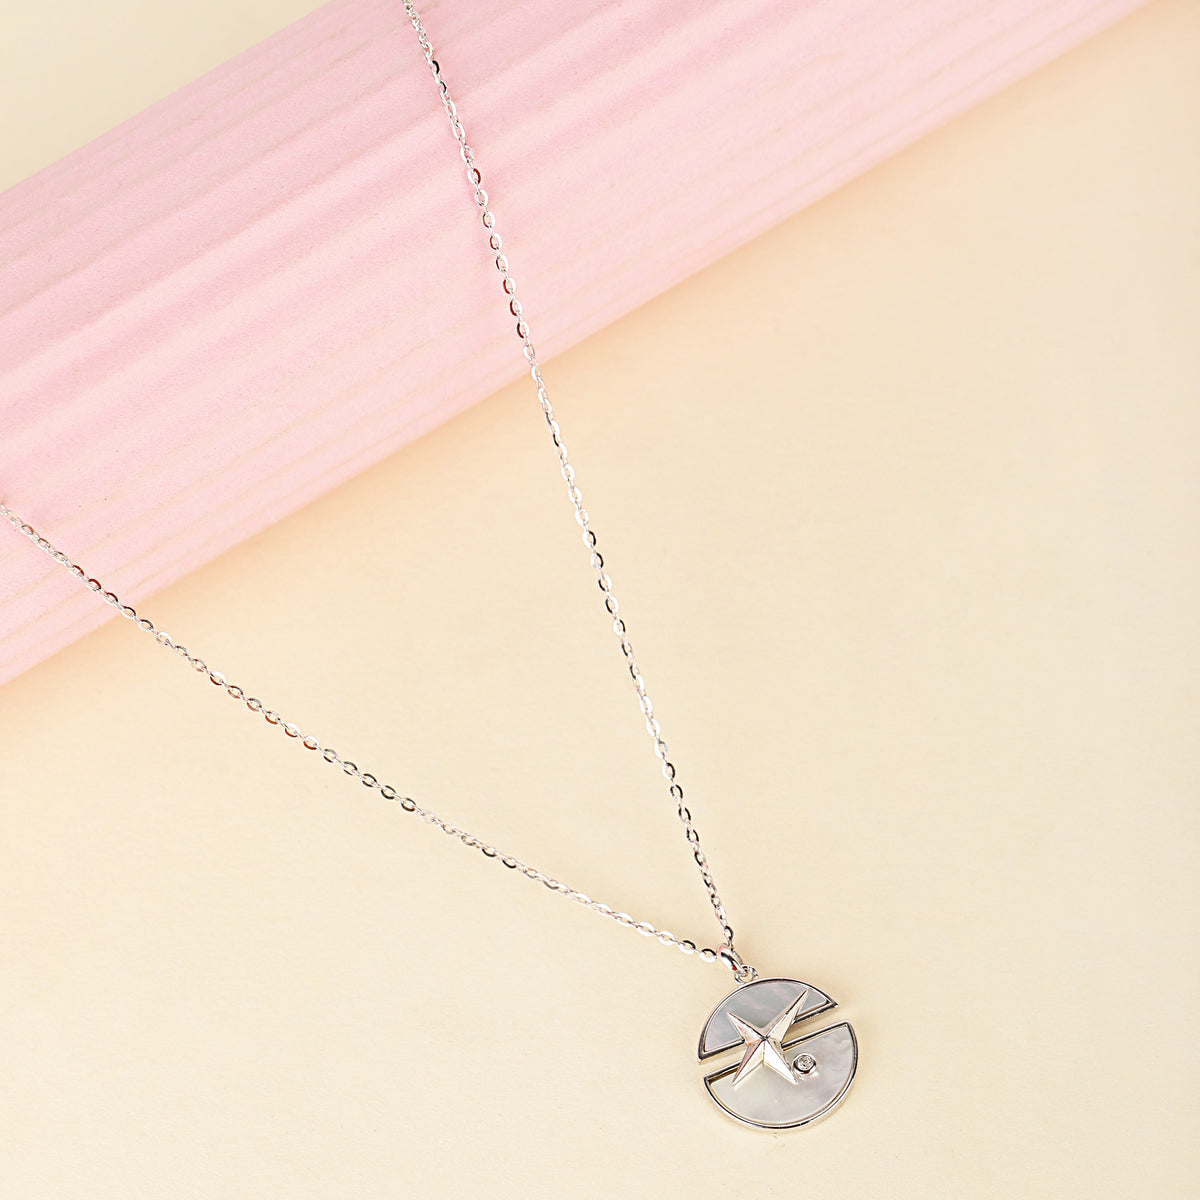 Silver Sparkling Star Necklace